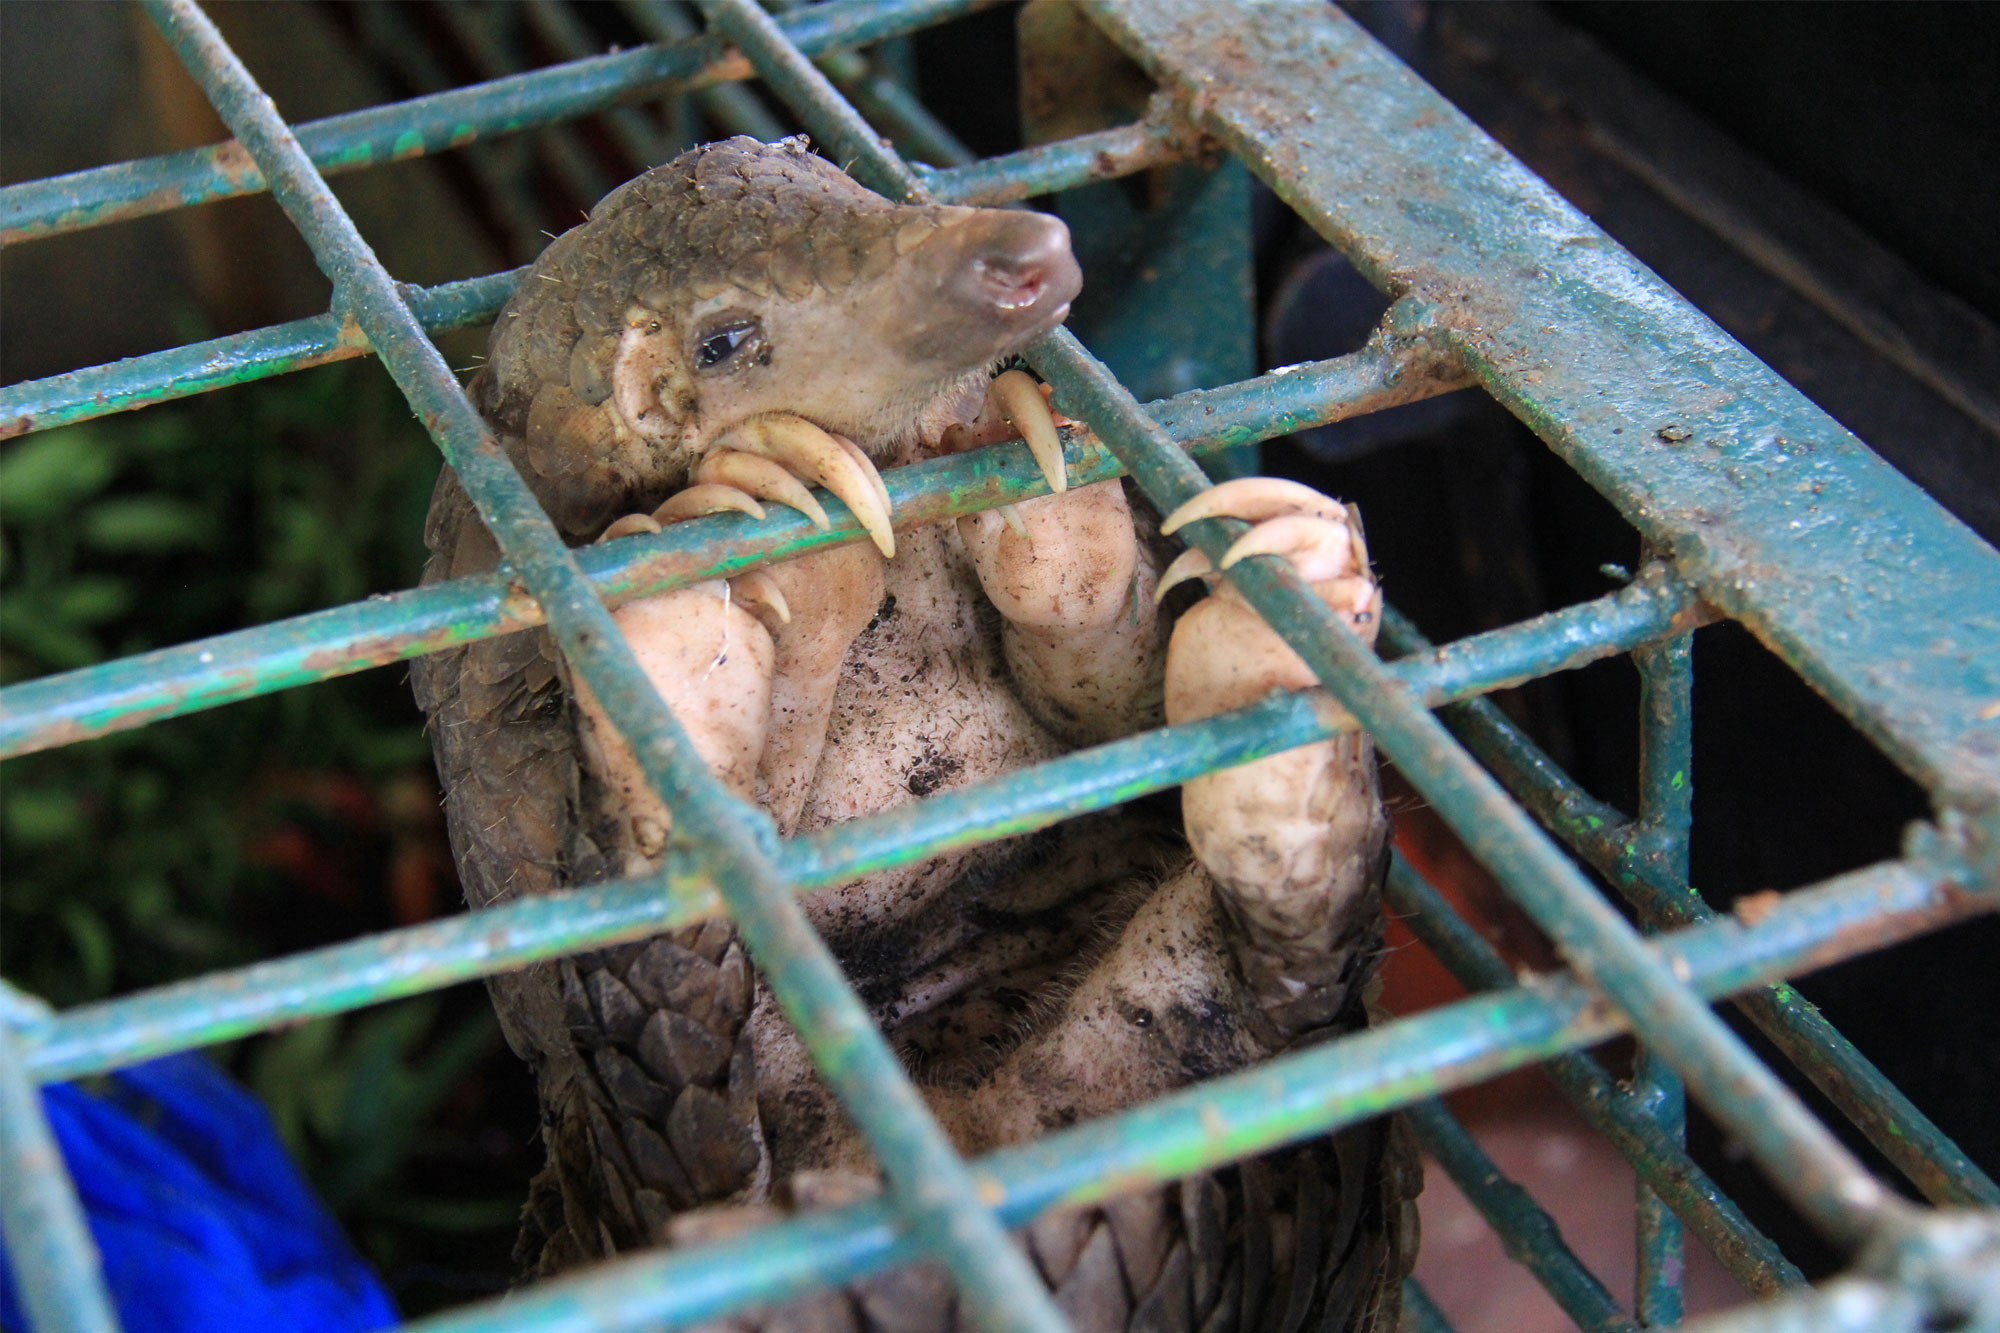 A smuggled pangolin rescued from the illegal wildlife trade in Indonesia.